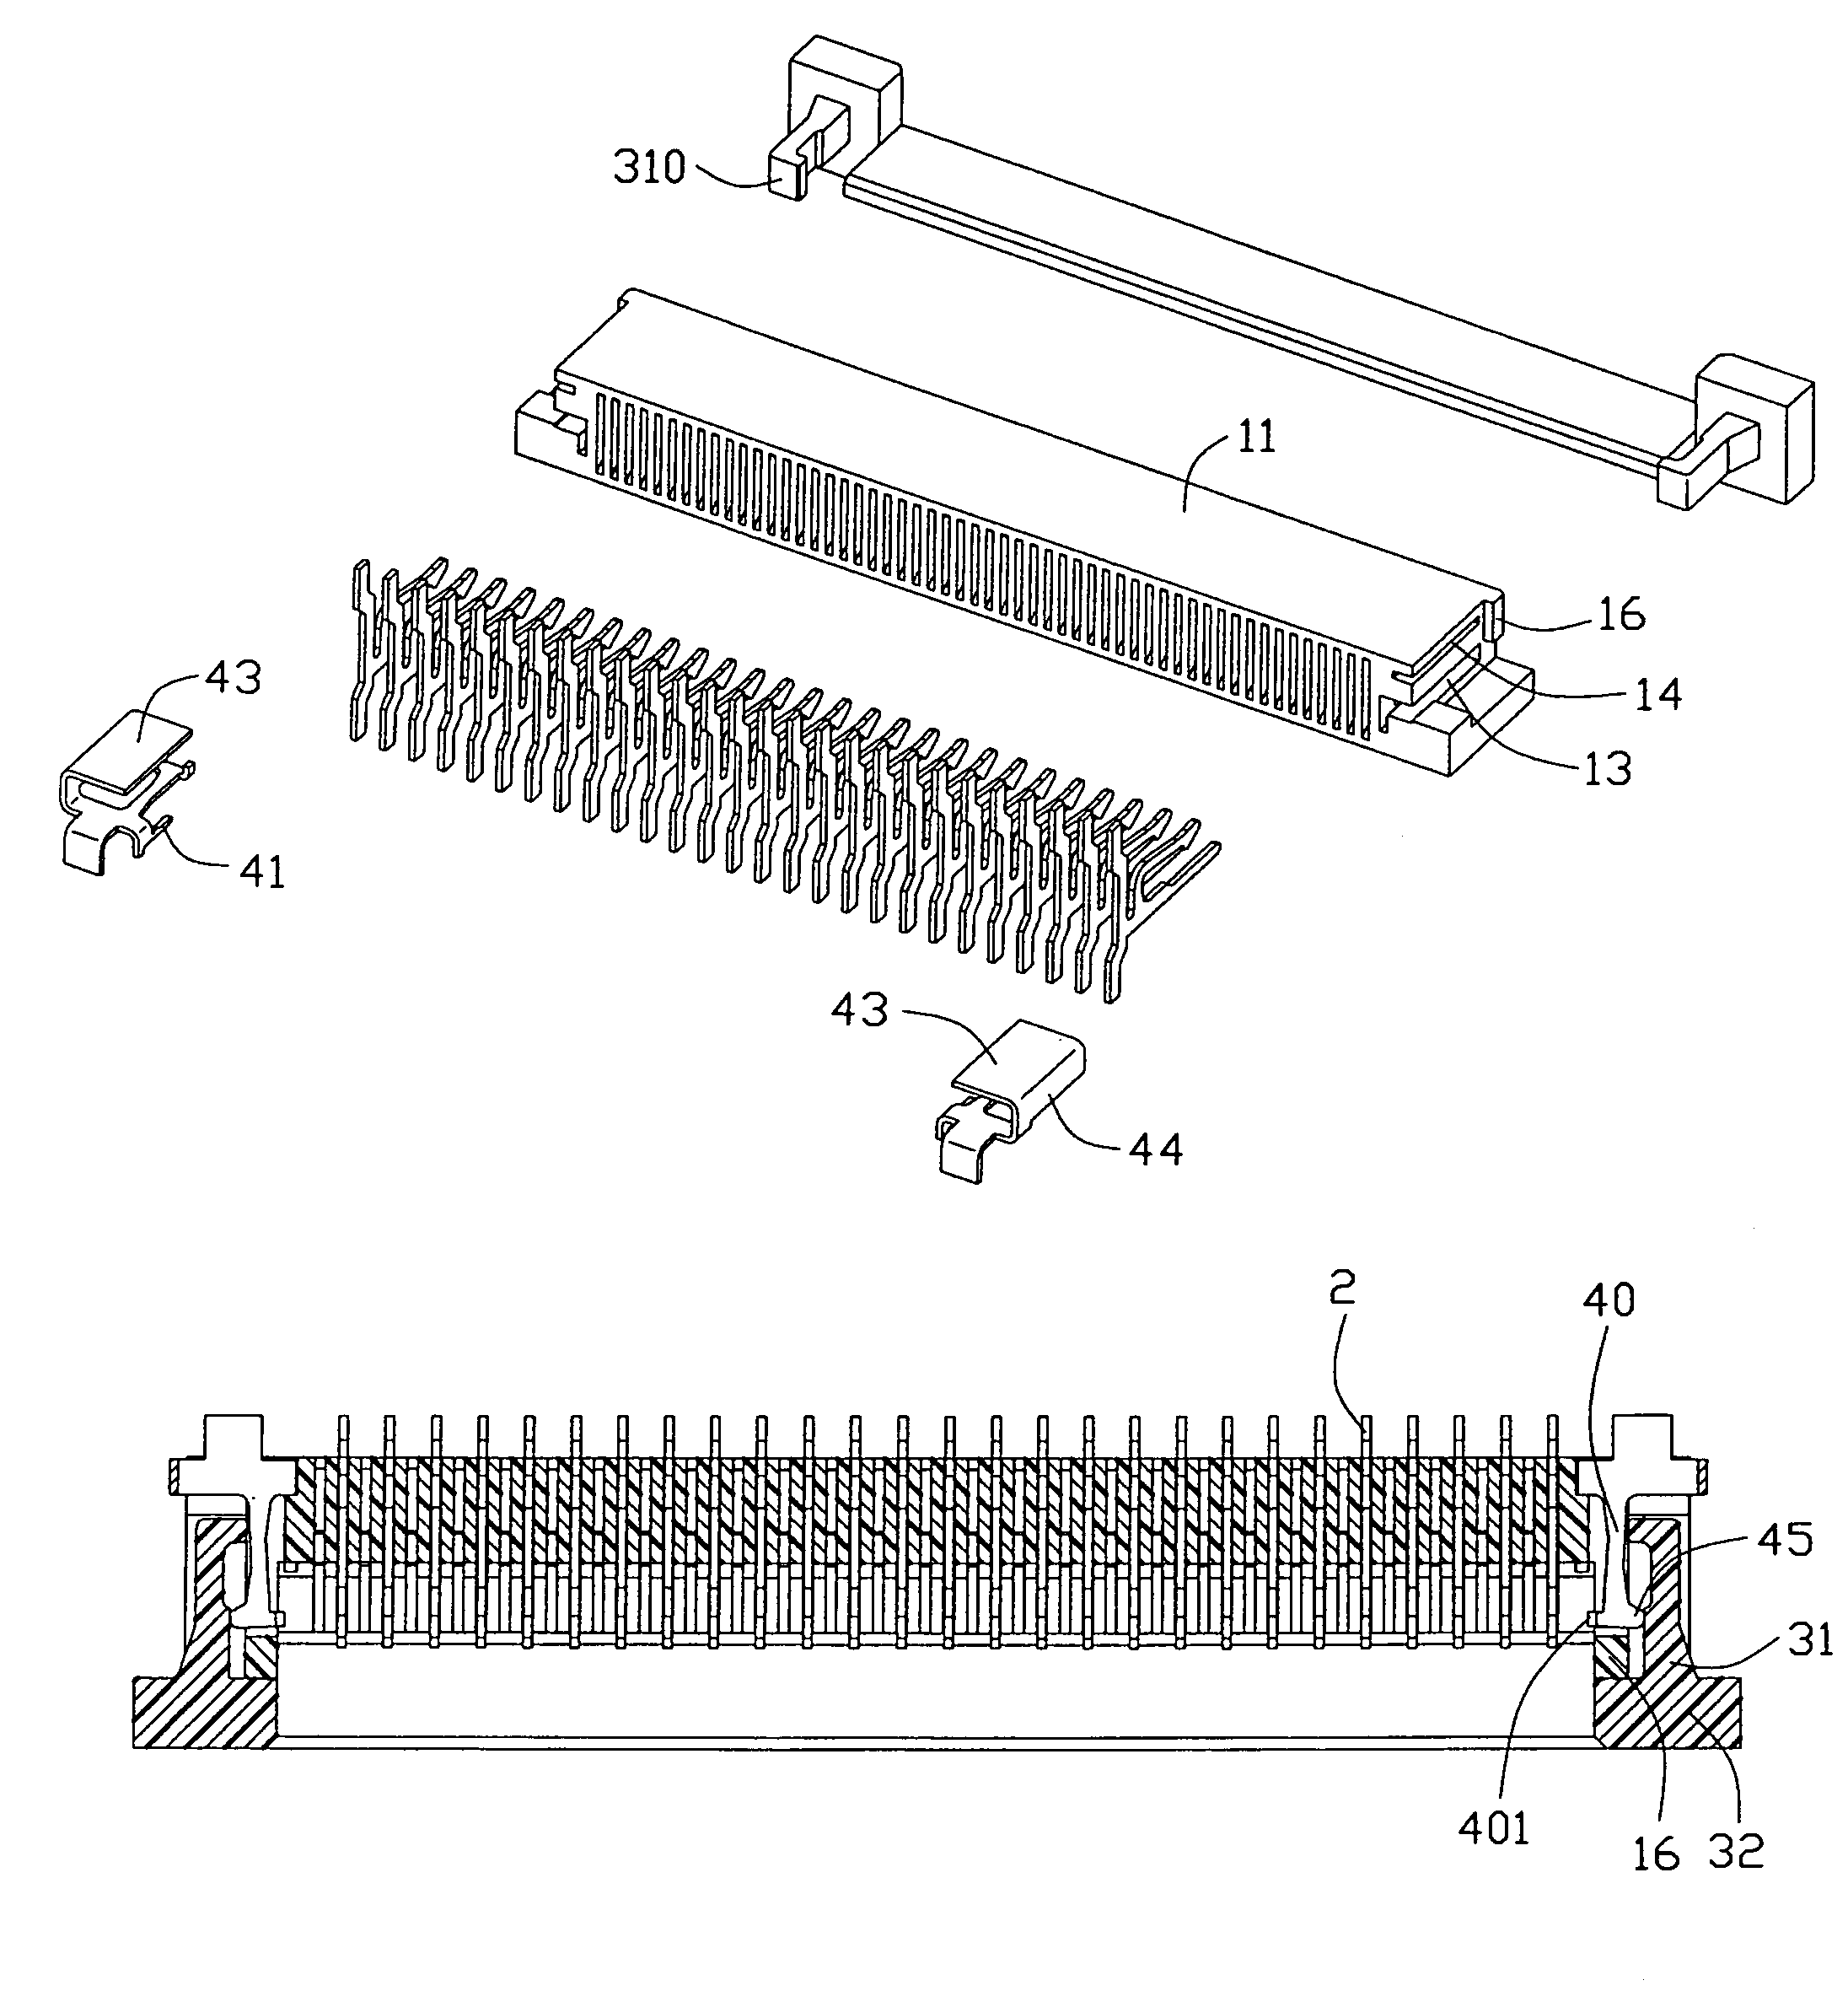 Electrical connector with latching member